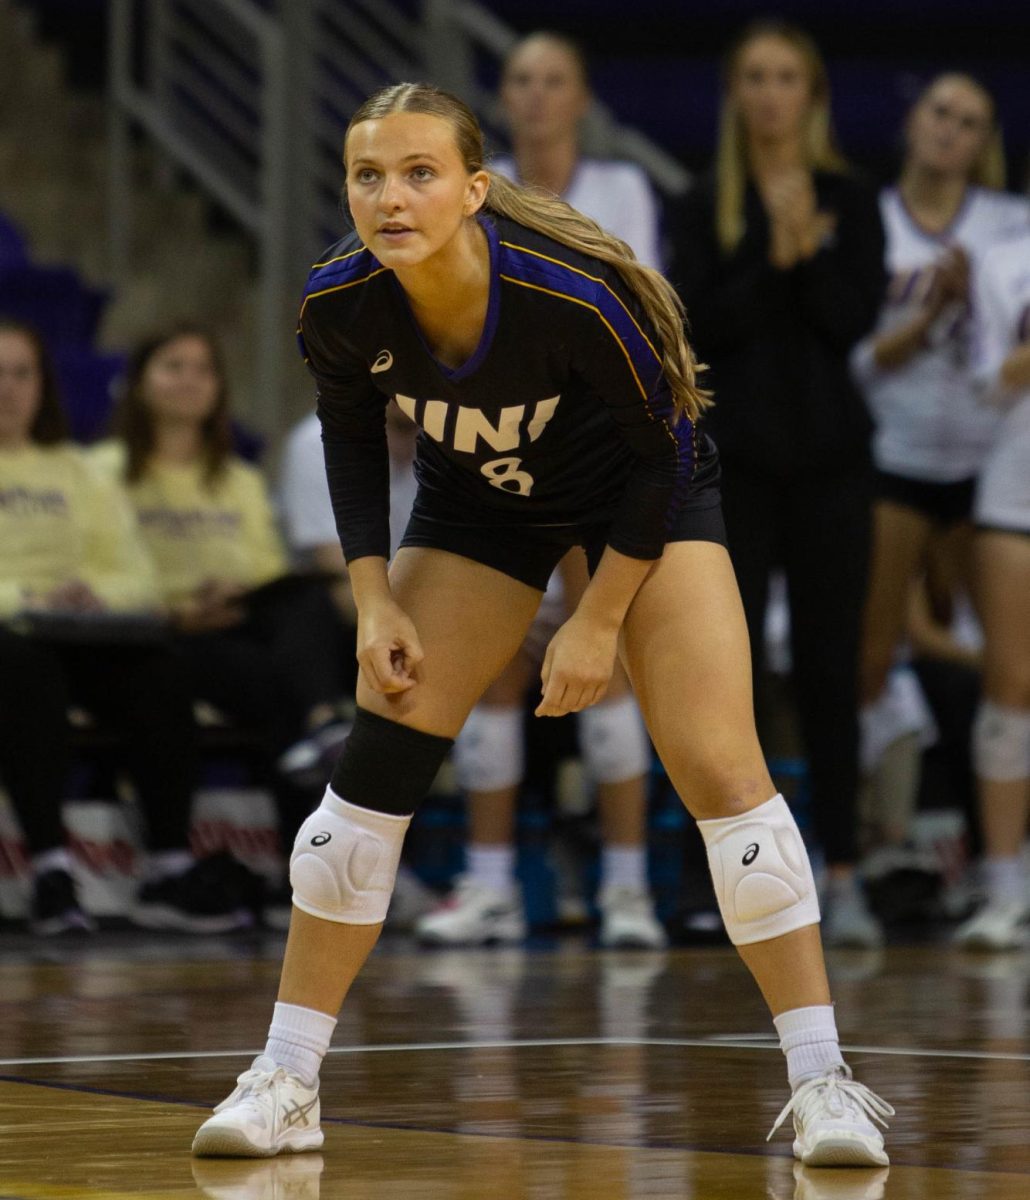 Erin Powers helped the Panthers obtain their second outright MVC Championship.